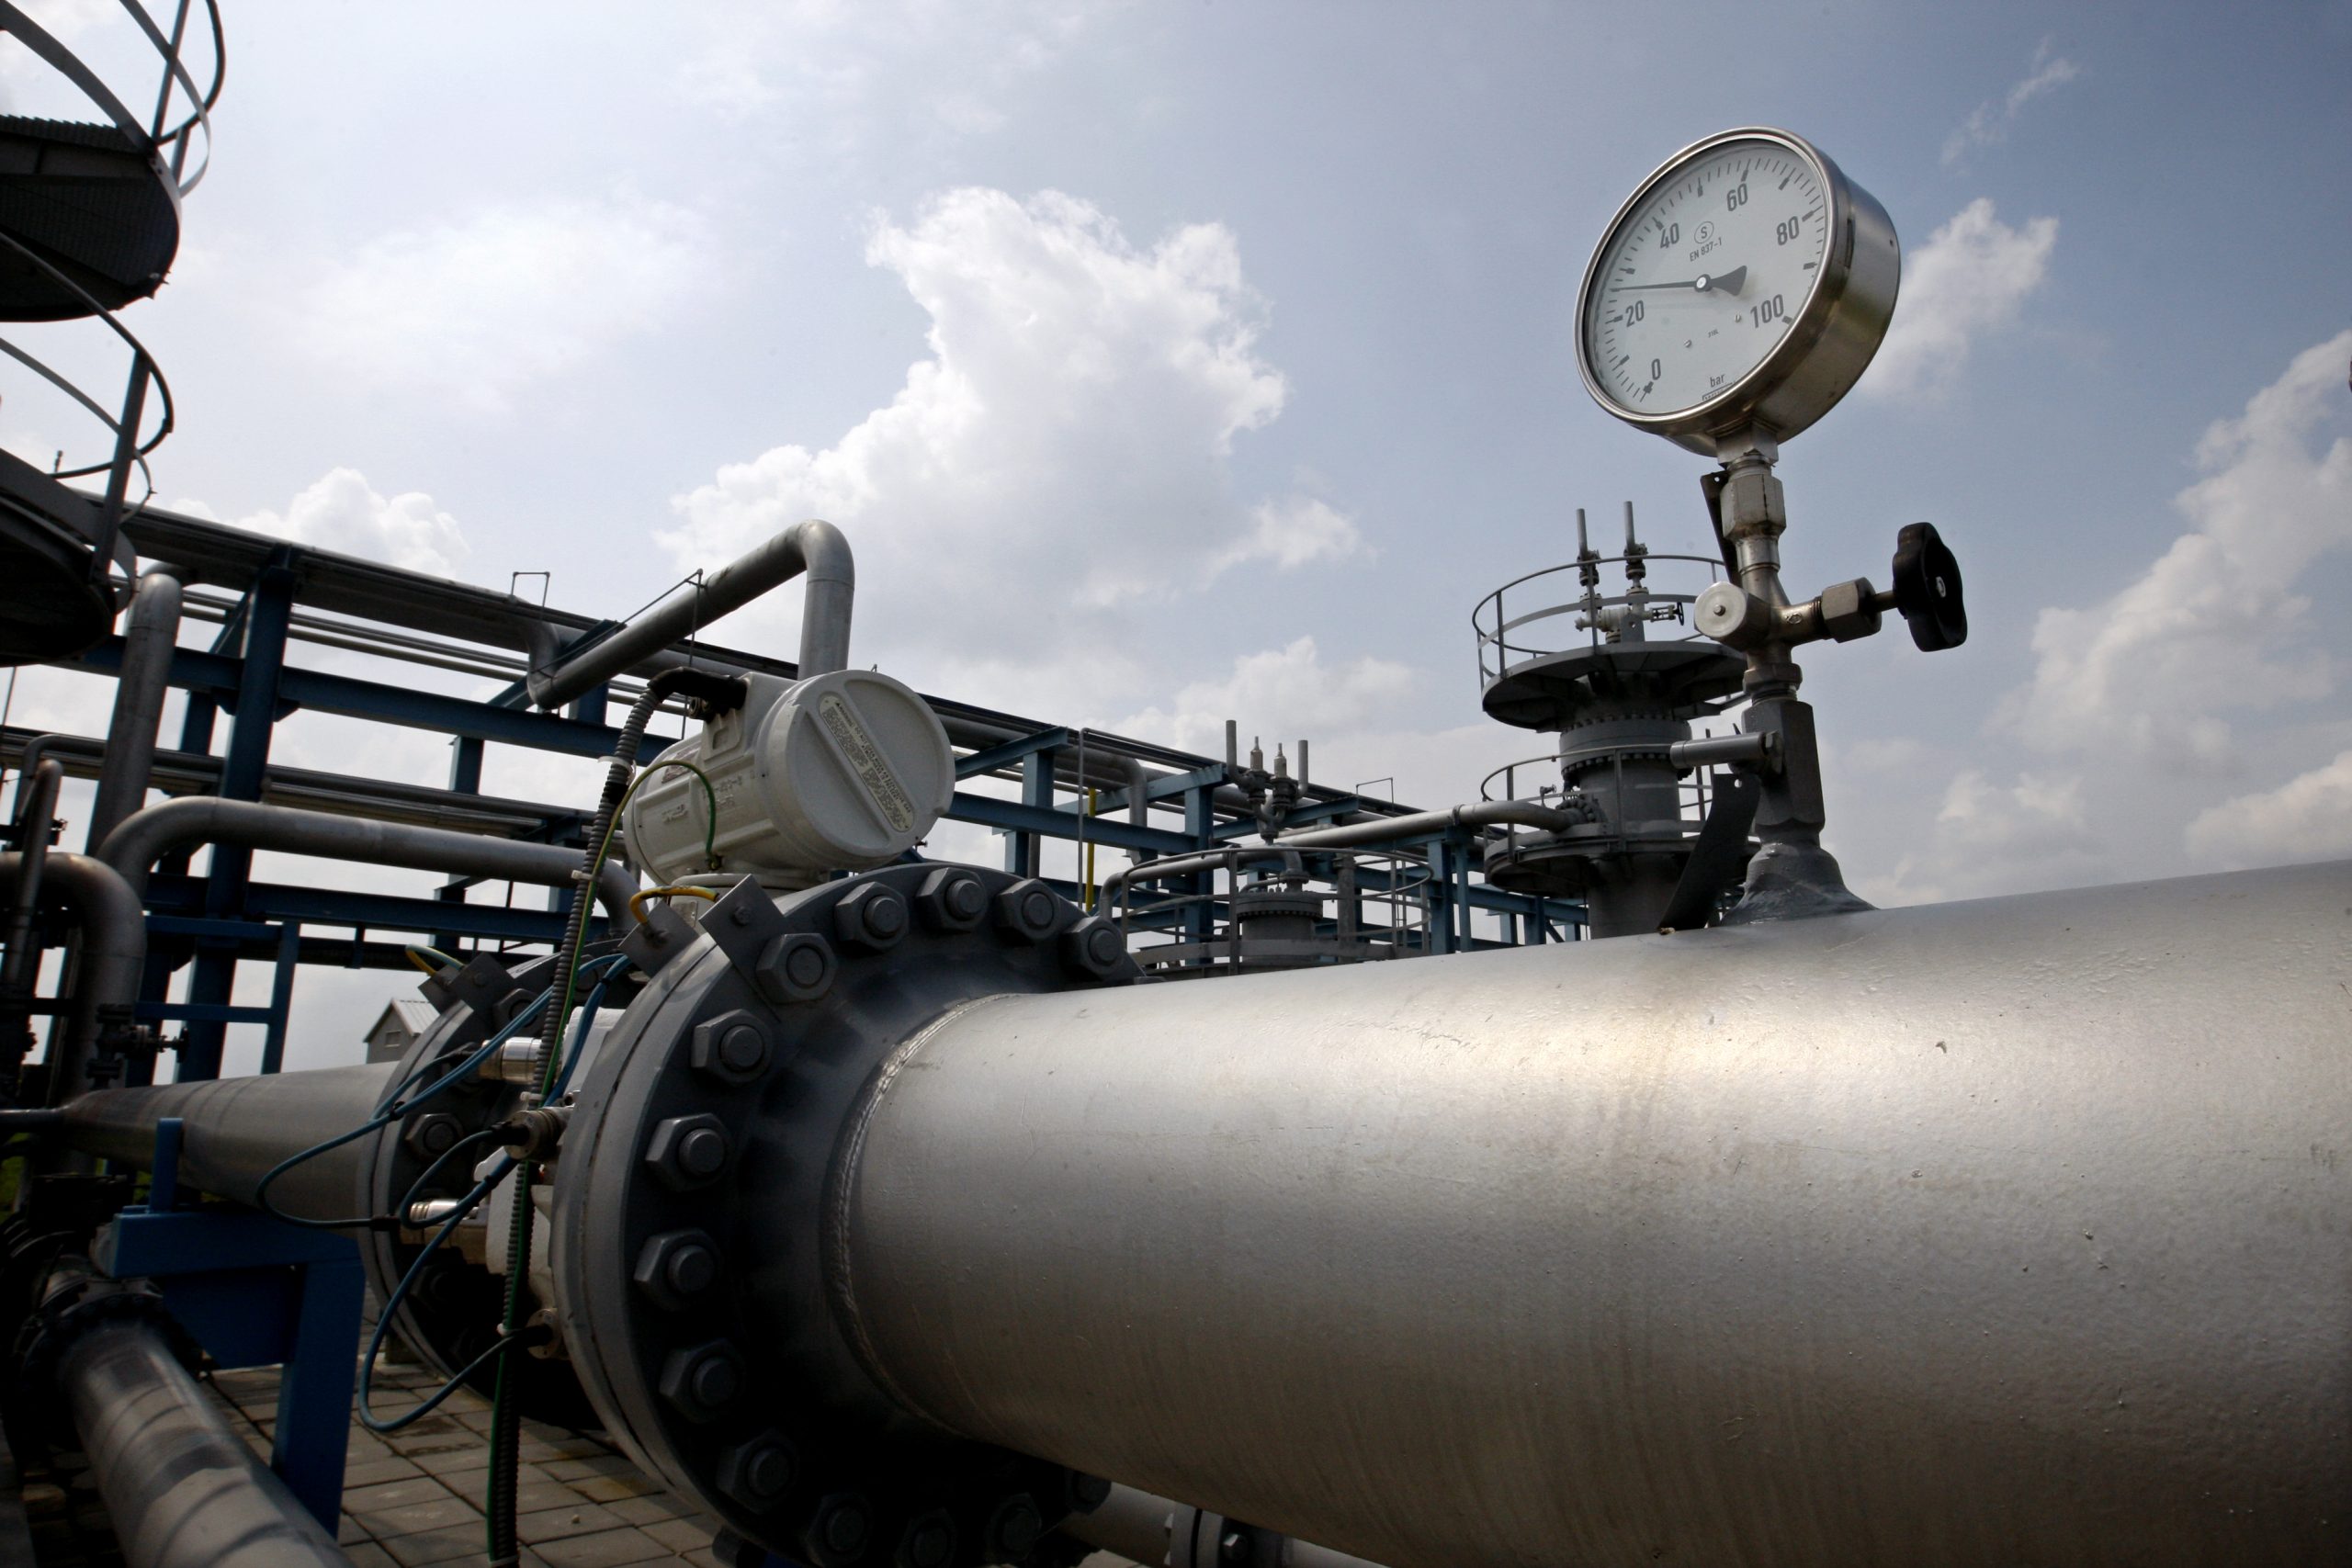 Completion date of OB3 gas pipeline project in Nigeria pushed to 2021